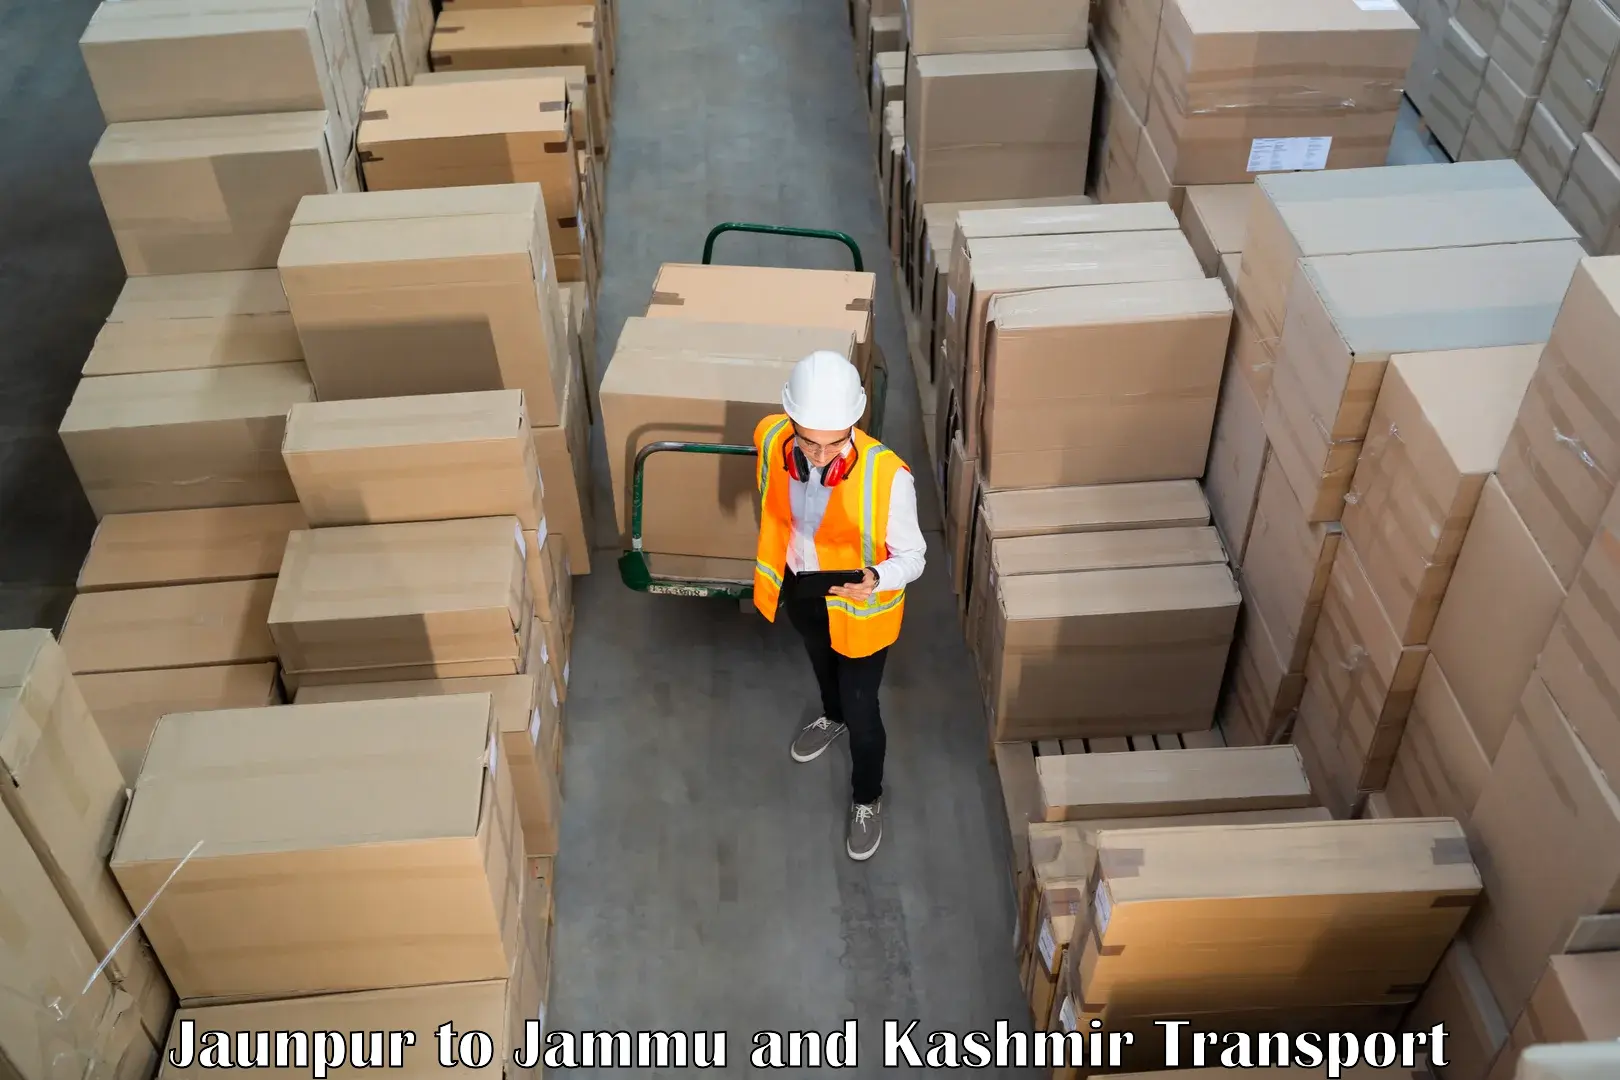 Delivery service Jaunpur to Jammu and Kashmir